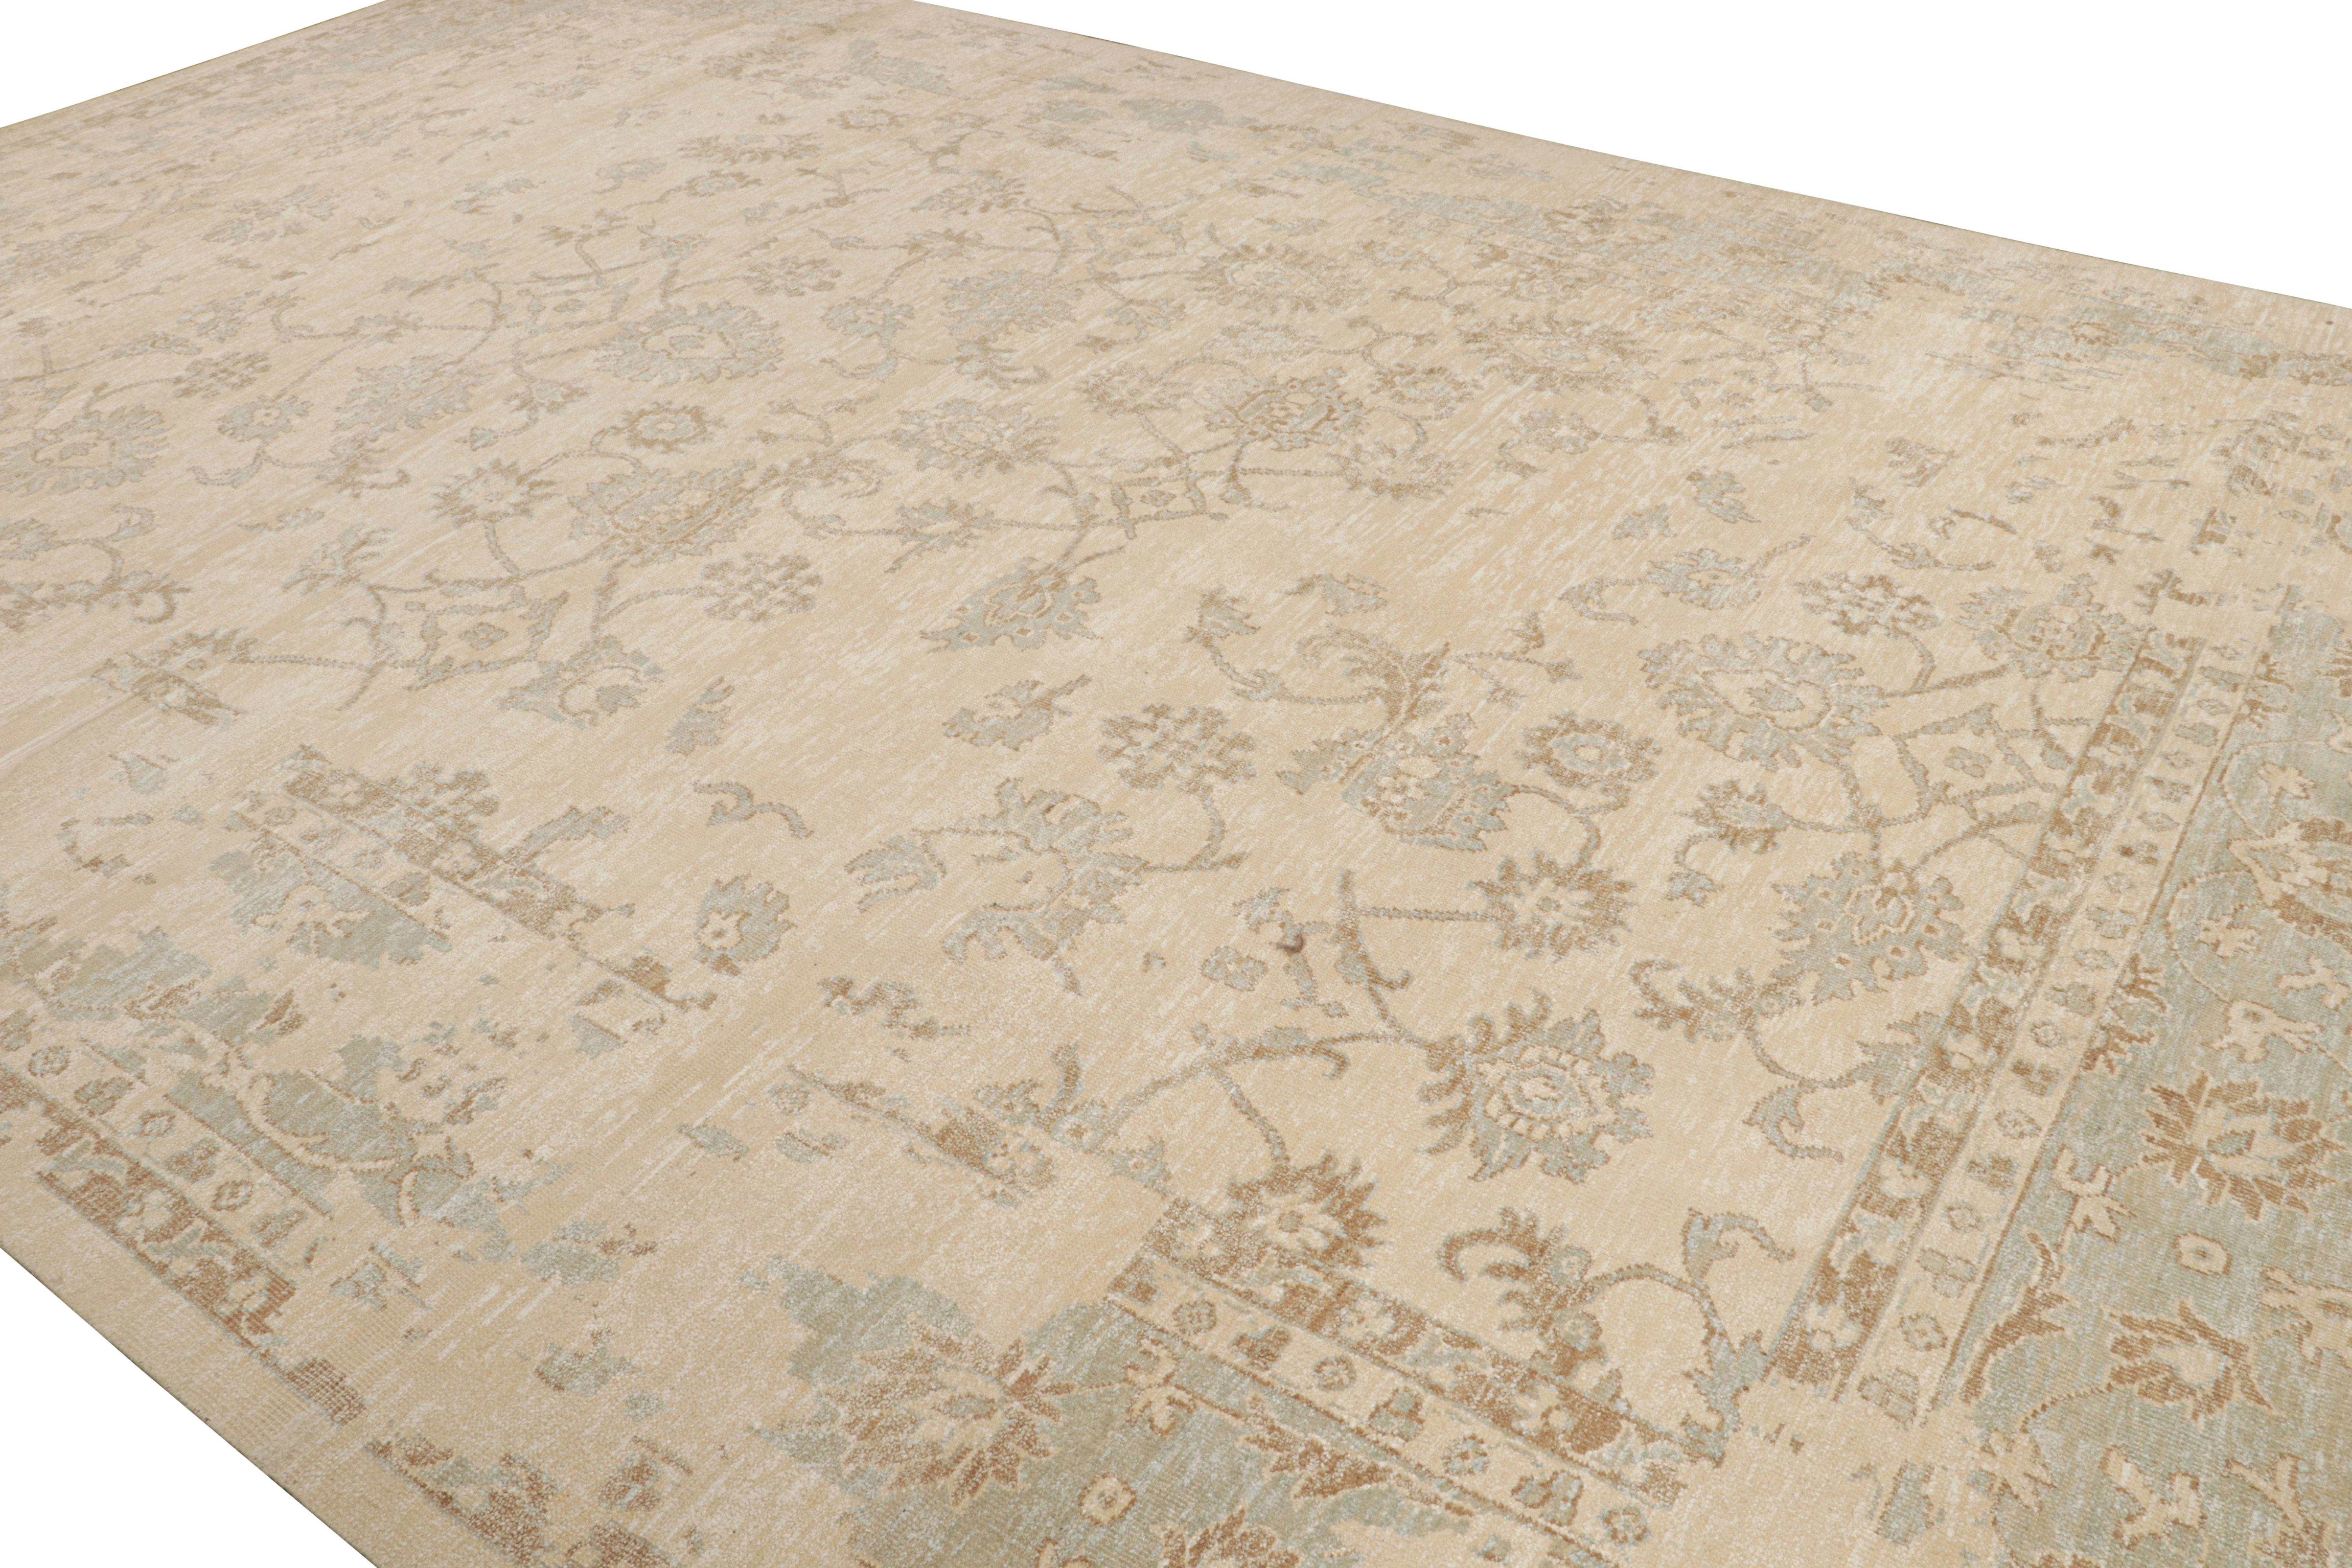 This 12x18 rug from the Modern Classics Collection features floral patterns and a playful sort of ‘distressed’ painterly approach to the pattern meant to have a Rustic Modern aesthetic. 

On the design: 

Connoisseurs will admire that this rug is